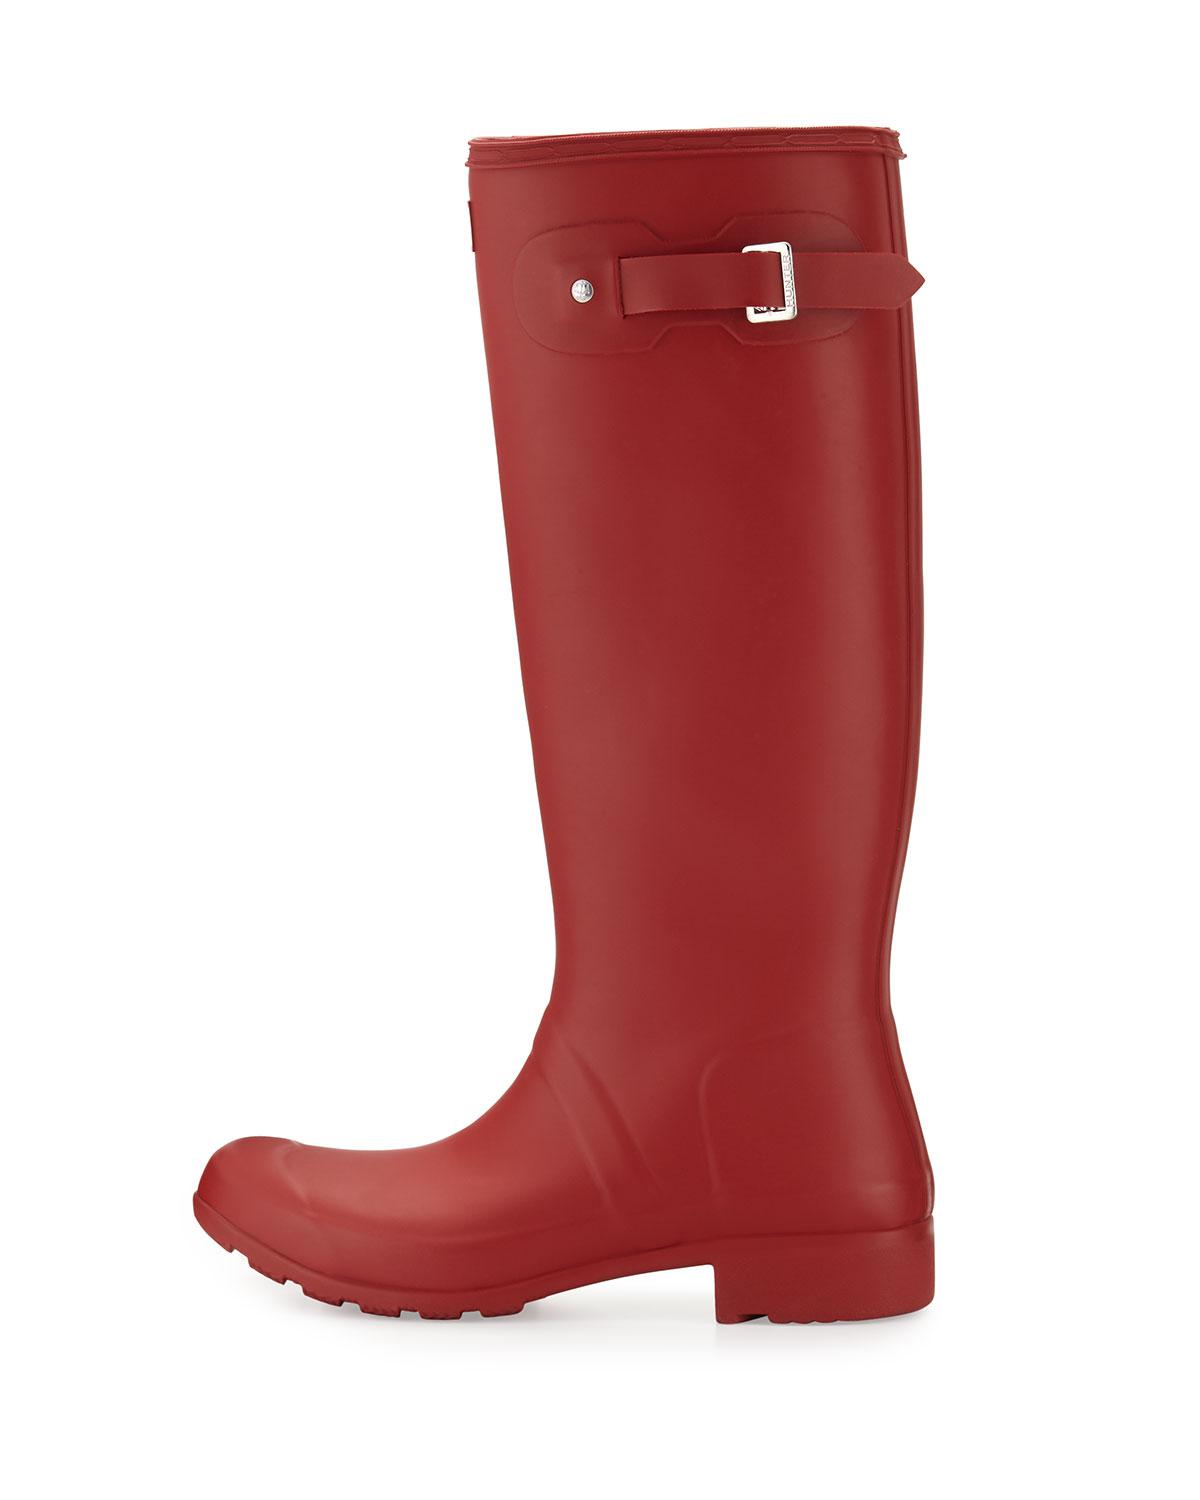 Lyst - Hunter Original Tour Welly Boot in Red